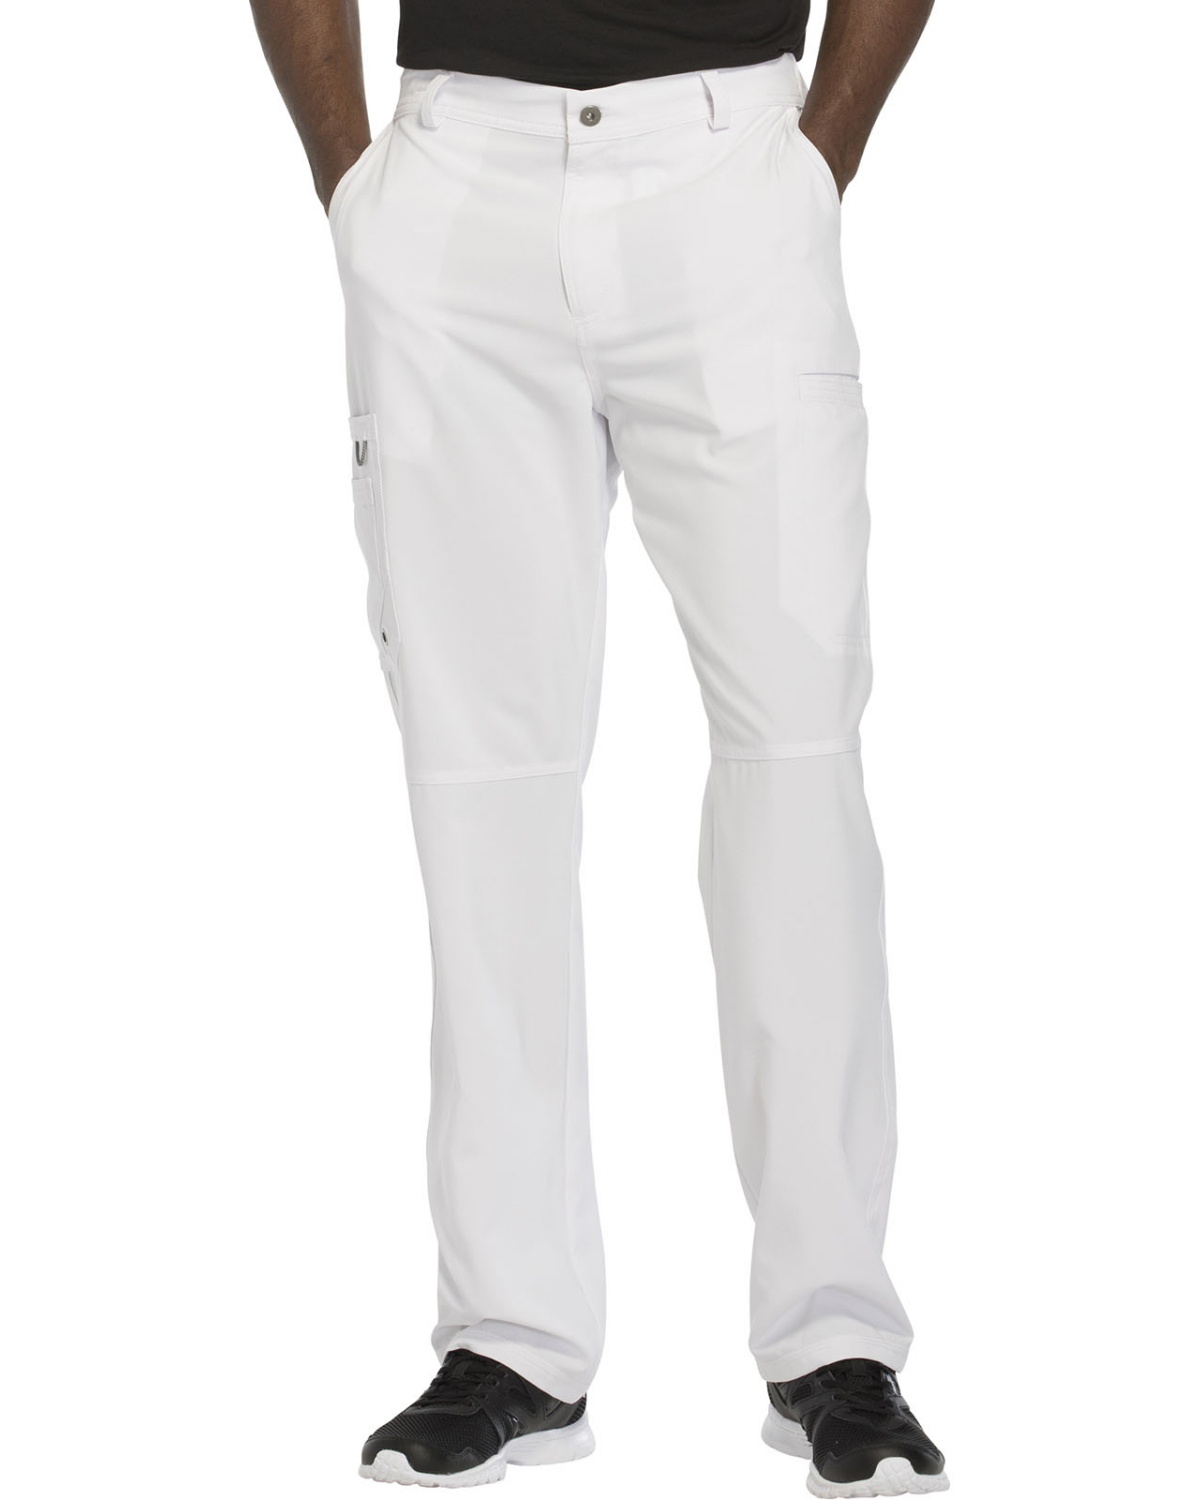 'Cherokee CK200A Men's Fly Front Pant'